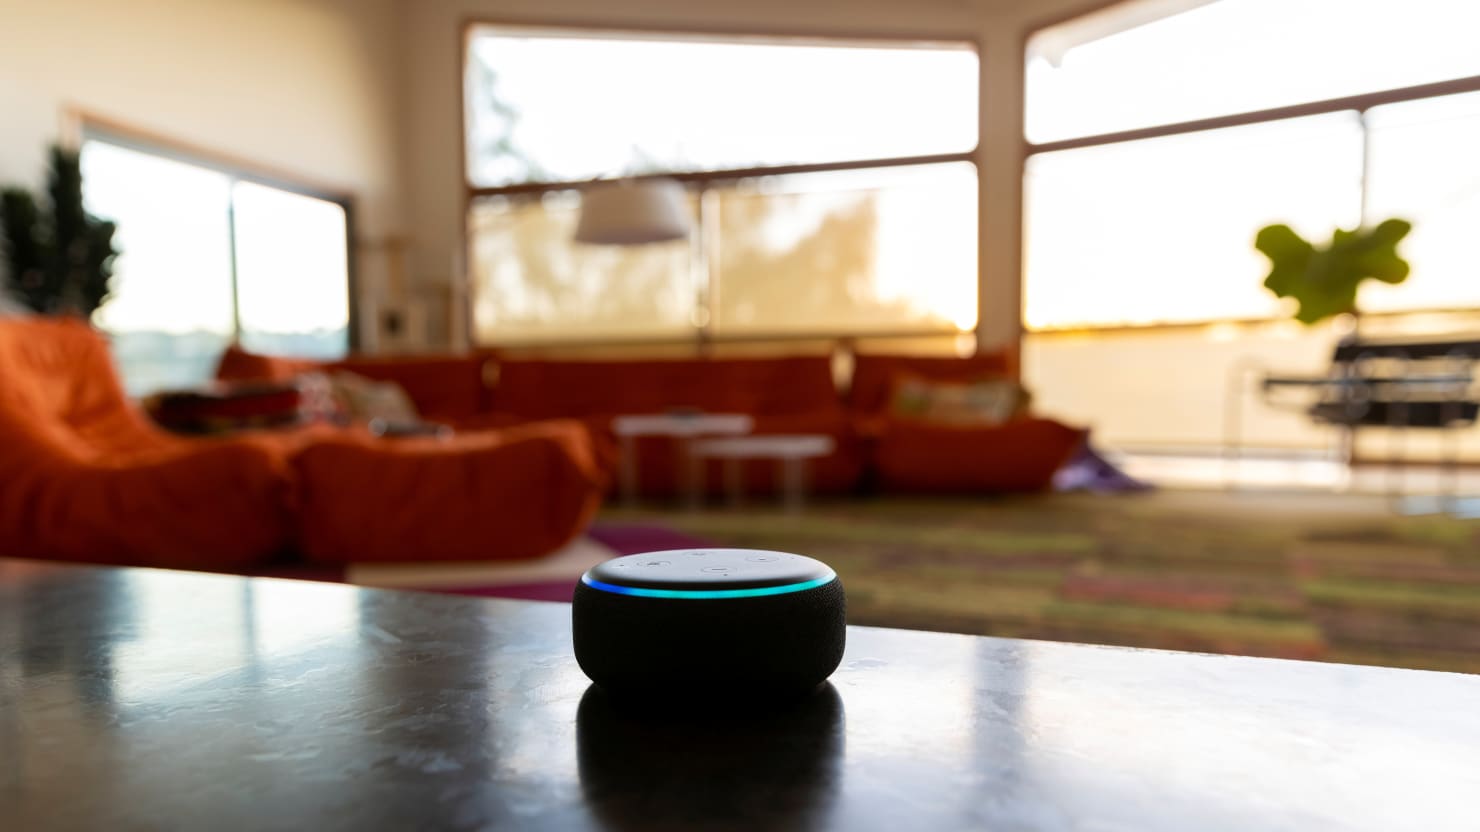 to pay over $30 million to settle claims Ring, Alexa